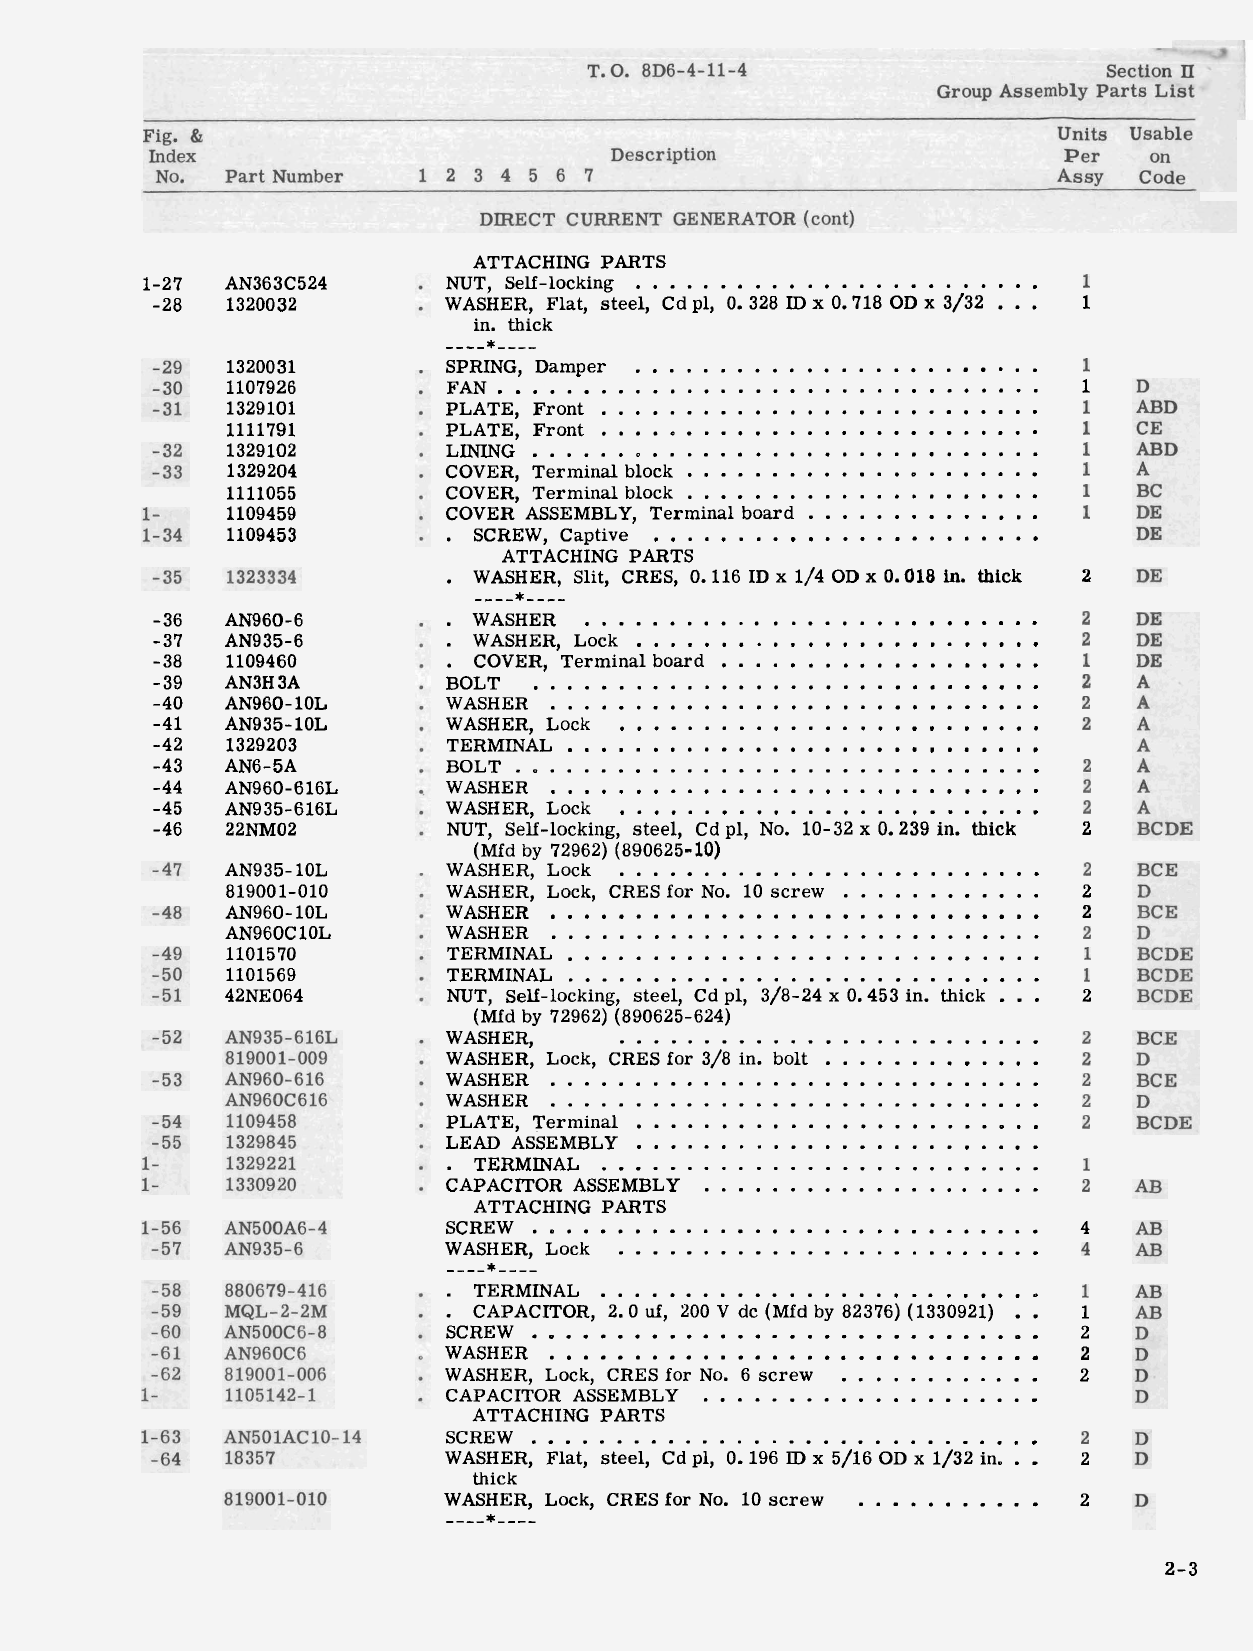 Sample page 5 from AirCorps Library document: Illustrated Parts Breakdown for Direct Current Generator - Types 30E20-1-A, 30E20-5-A, 30E20-5-B, 30E20-19-A, and 30E20-33-B 